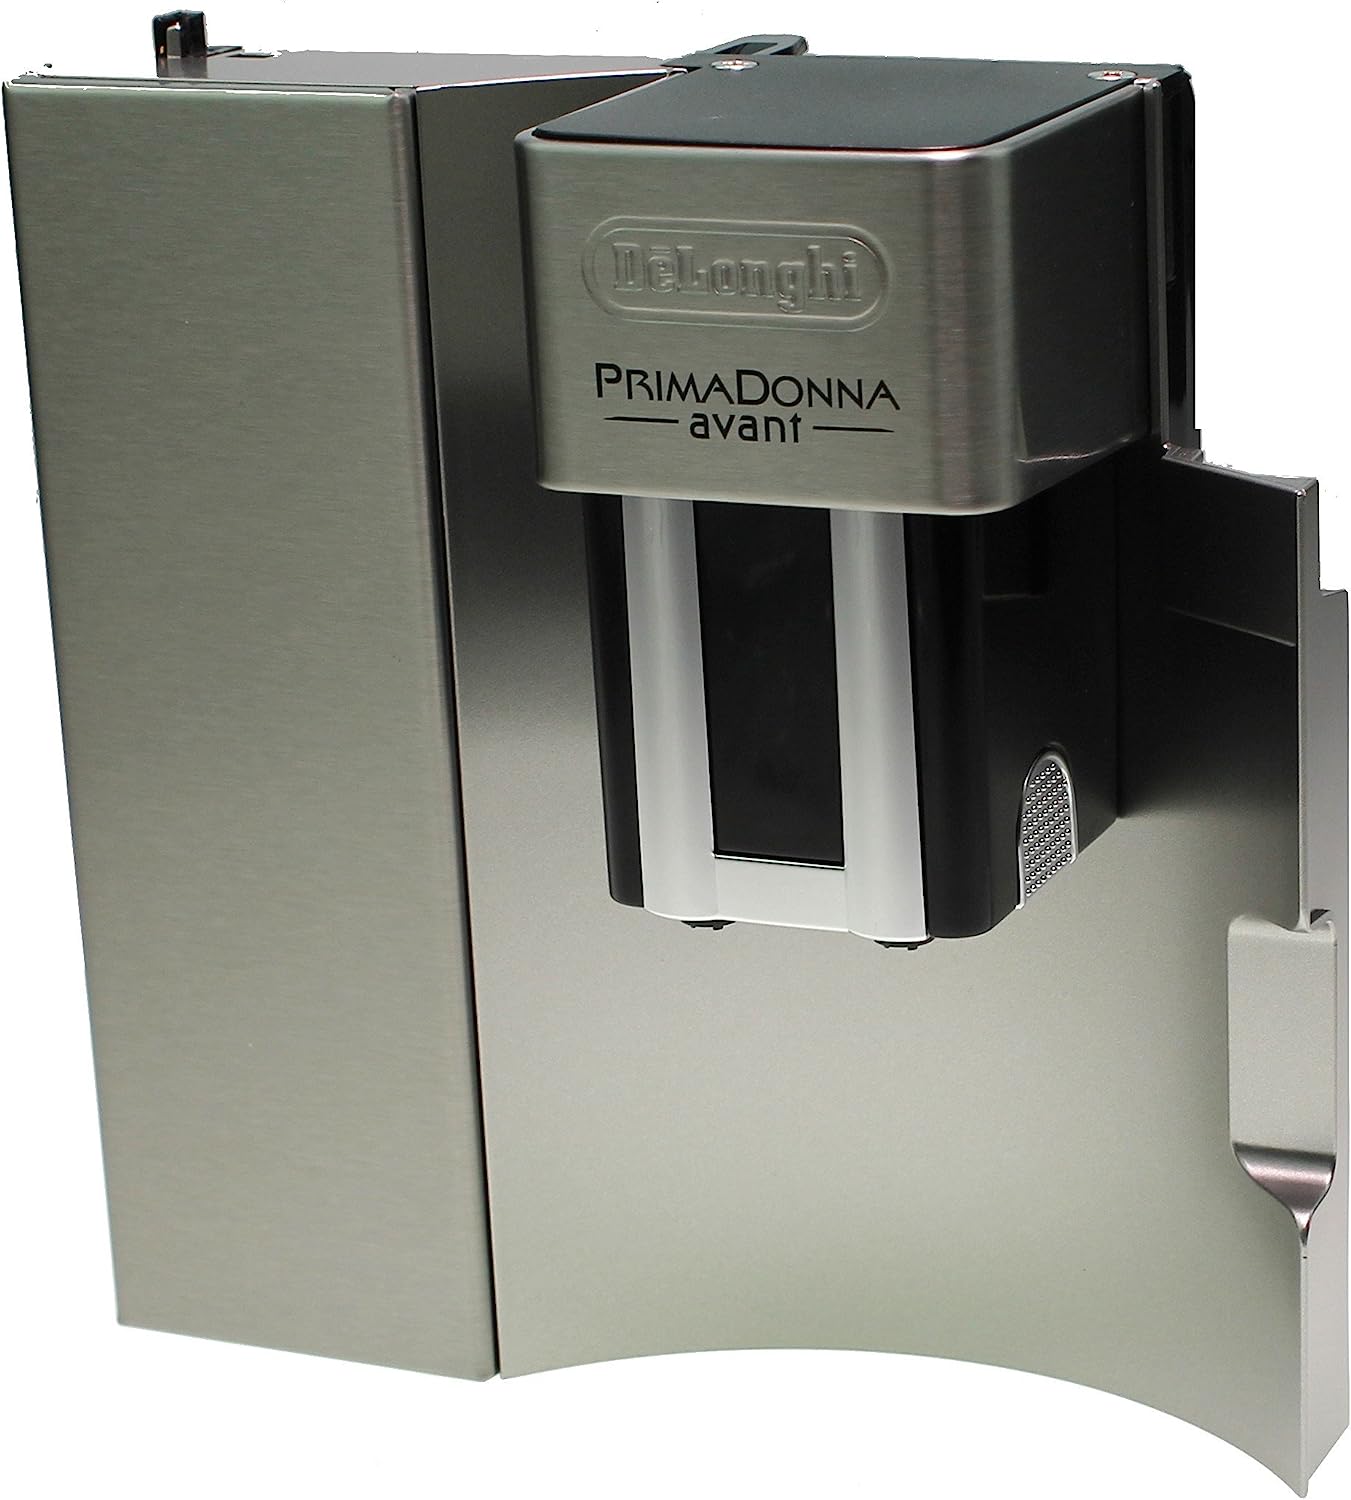 Door Coffee Spout 7313224921 Compatible with Delonghi Esam6700 Primadonna Avant Fully Automatic Coffee Machine